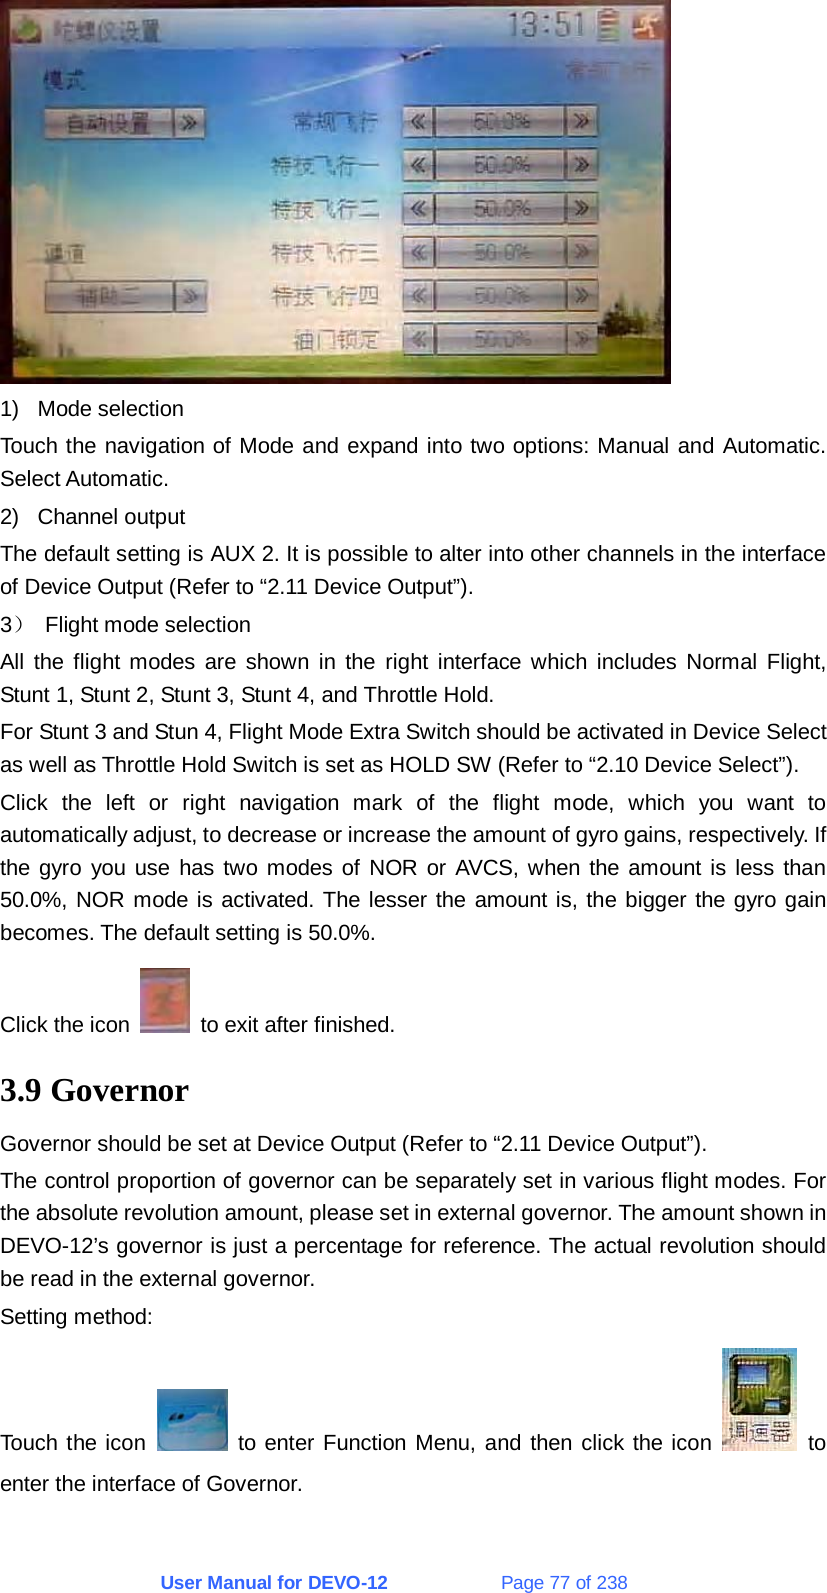 User Manual for DEVO-12             Page 77 of 238  1) Mode selection Touch the navigation of Mode and expand into two options: Manual and Automatic. Select Automatic. 2) Channel output The default setting is AUX 2. It is possible to alter into other channels in the interface of Device Output (Refer to “2.11 Device Output”). 3） Flight mode selection All the flight modes are shown in the right interface which includes Normal Flight, Stunt 1, Stunt 2, Stunt 3, Stunt 4, and Throttle Hold. For Stunt 3 and Stun 4, Flight Mode Extra Switch should be activated in Device Select as well as Throttle Hold Switch is set as HOLD SW (Refer to “2.10 Device Select”). Click the left or right navigation mark of the flight mode, which you want to automatically adjust, to decrease or increase the amount of gyro gains, respectively. If the gyro you use has two modes of NOR or AVCS, when the amount is less than 50.0%, NOR mode is activated. The lesser the amount is, the bigger the gyro gain becomes. The default setting is 50.0%. Click the icon    to exit after finished. 3.9 Governor Governor should be set at Device Output (Refer to “2.11 Device Output”). The control proportion of governor can be separately set in various flight modes. For the absolute revolution amount, please set in external governor. The amount shown in DEVO-12’s governor is just a percentage for reference. The actual revolution should be read in the external governor. Setting method: Touch the icon   to enter Function Menu, and then click the icon   to enter the interface of Governor.   